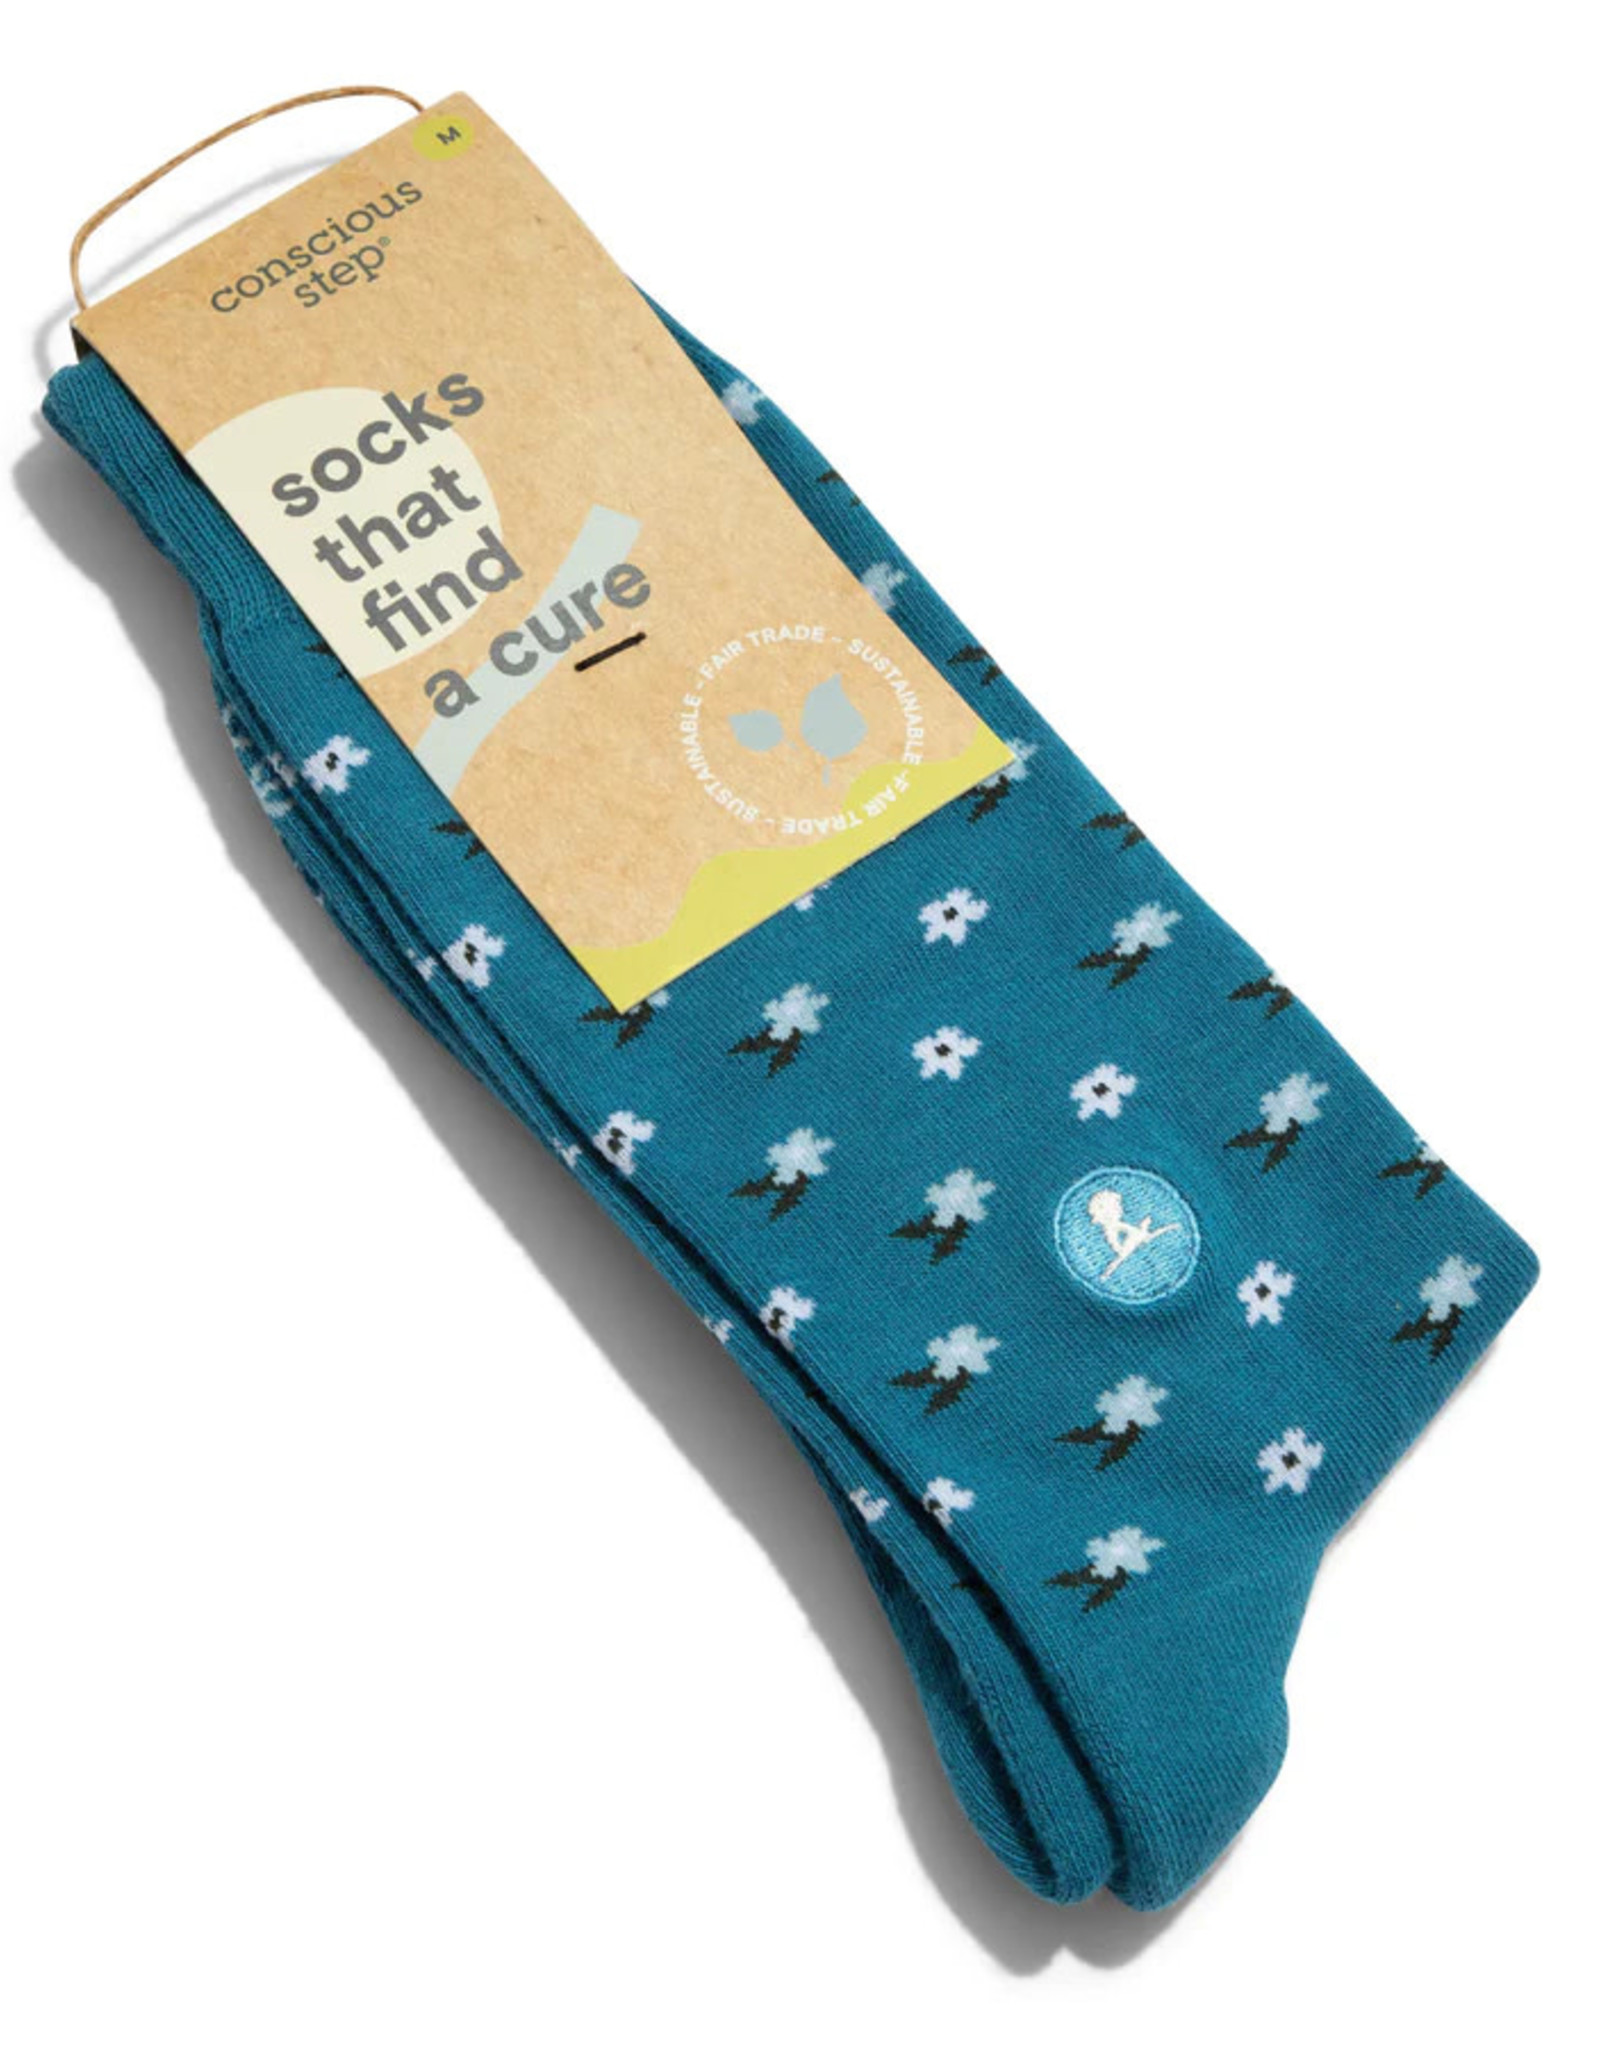 Conscious Step Socks that Find a Cure (Blue)